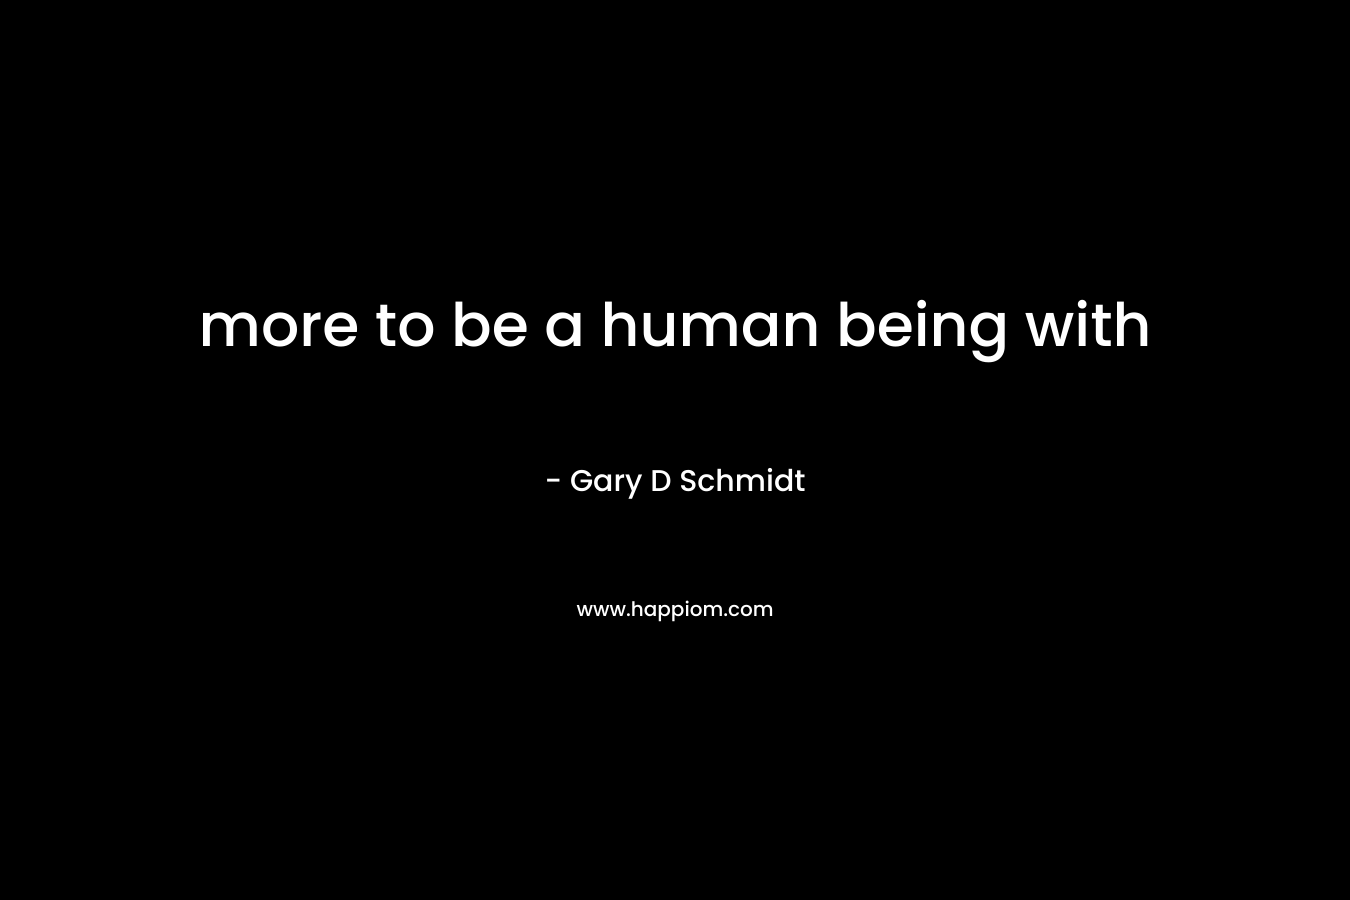 more to be a human being with